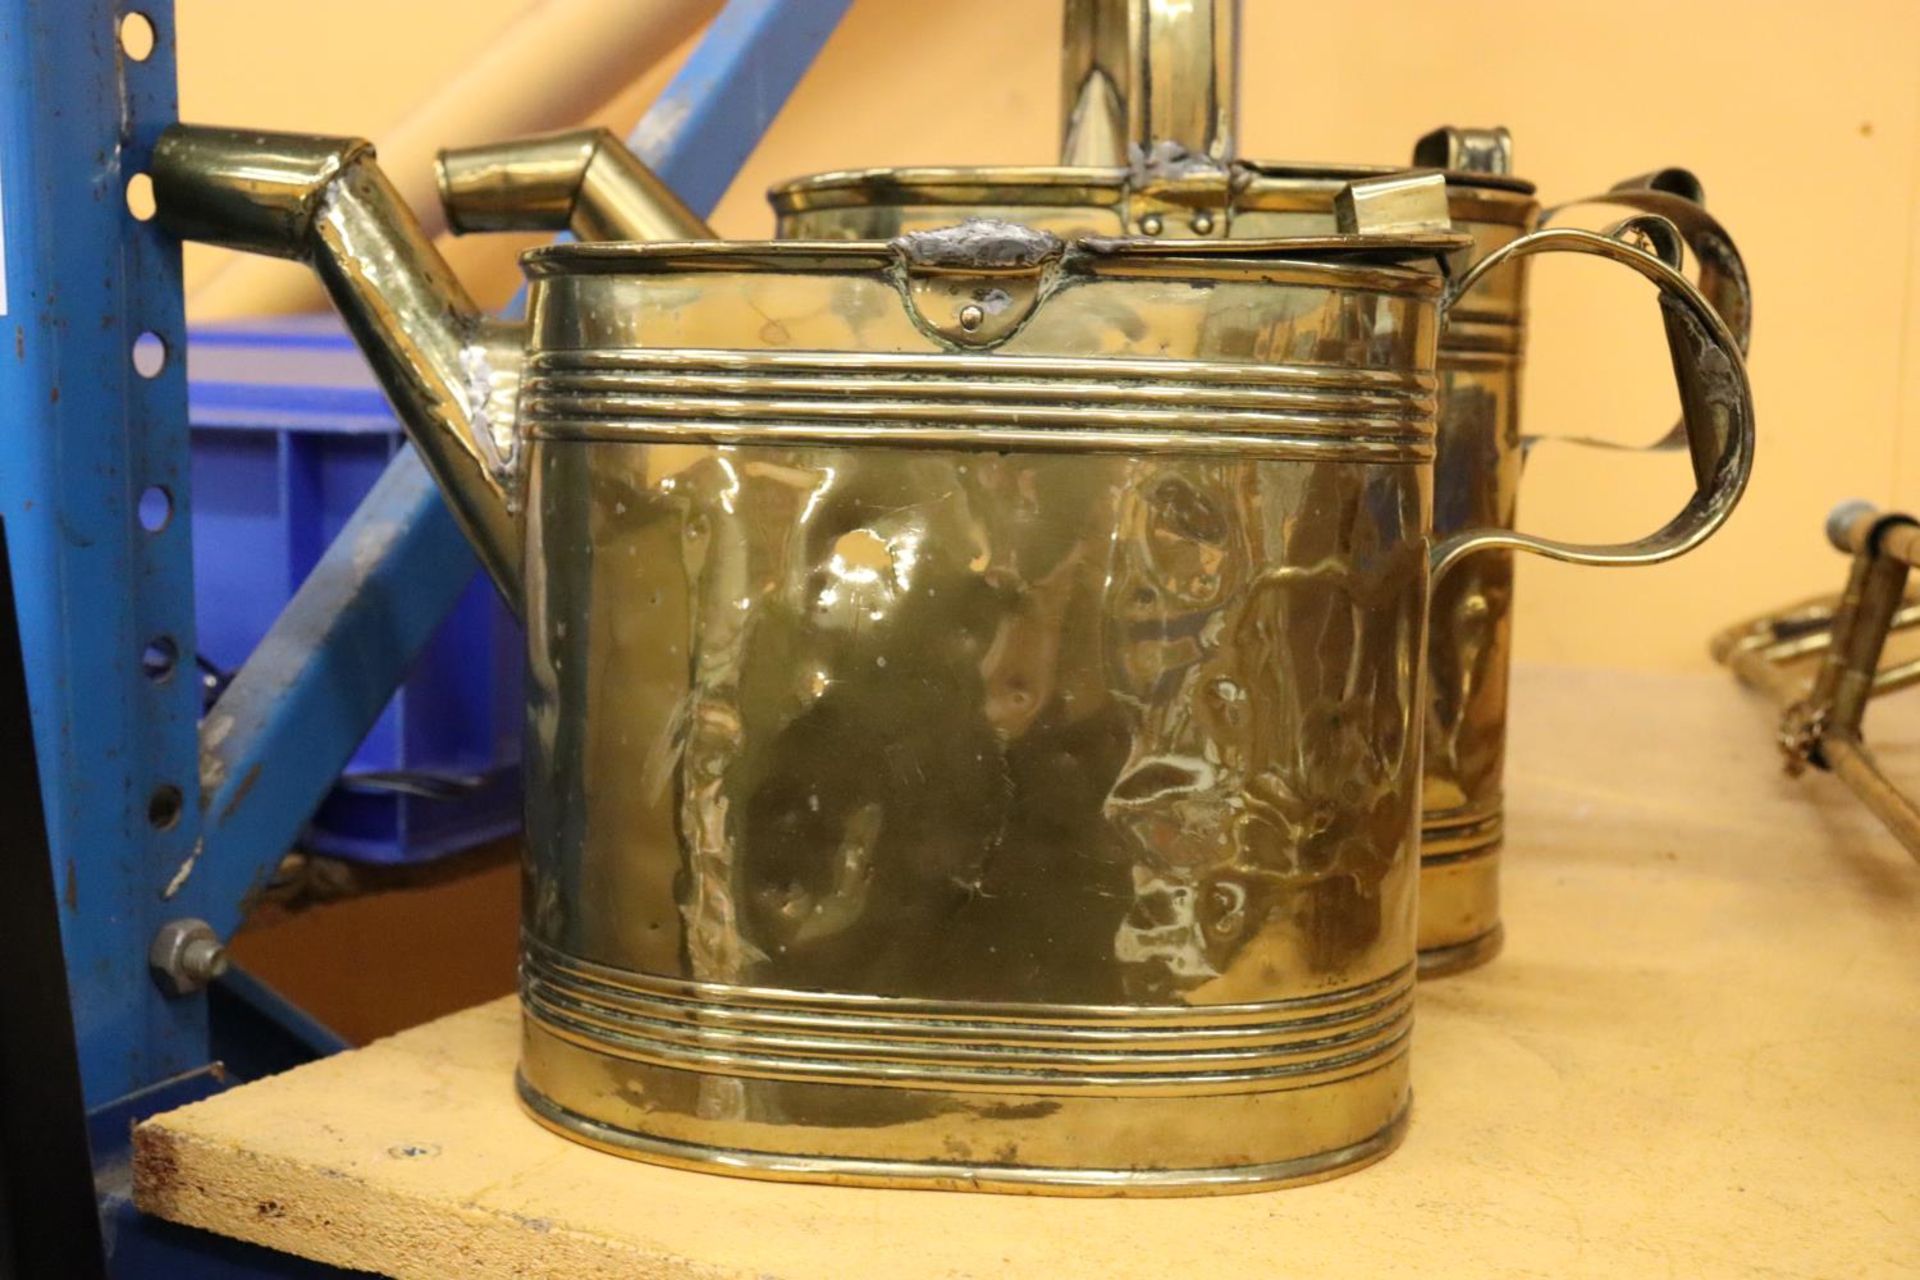 TWO BRASS WATERING CANS, ONE MISSING THE HANDLE - Image 2 of 5